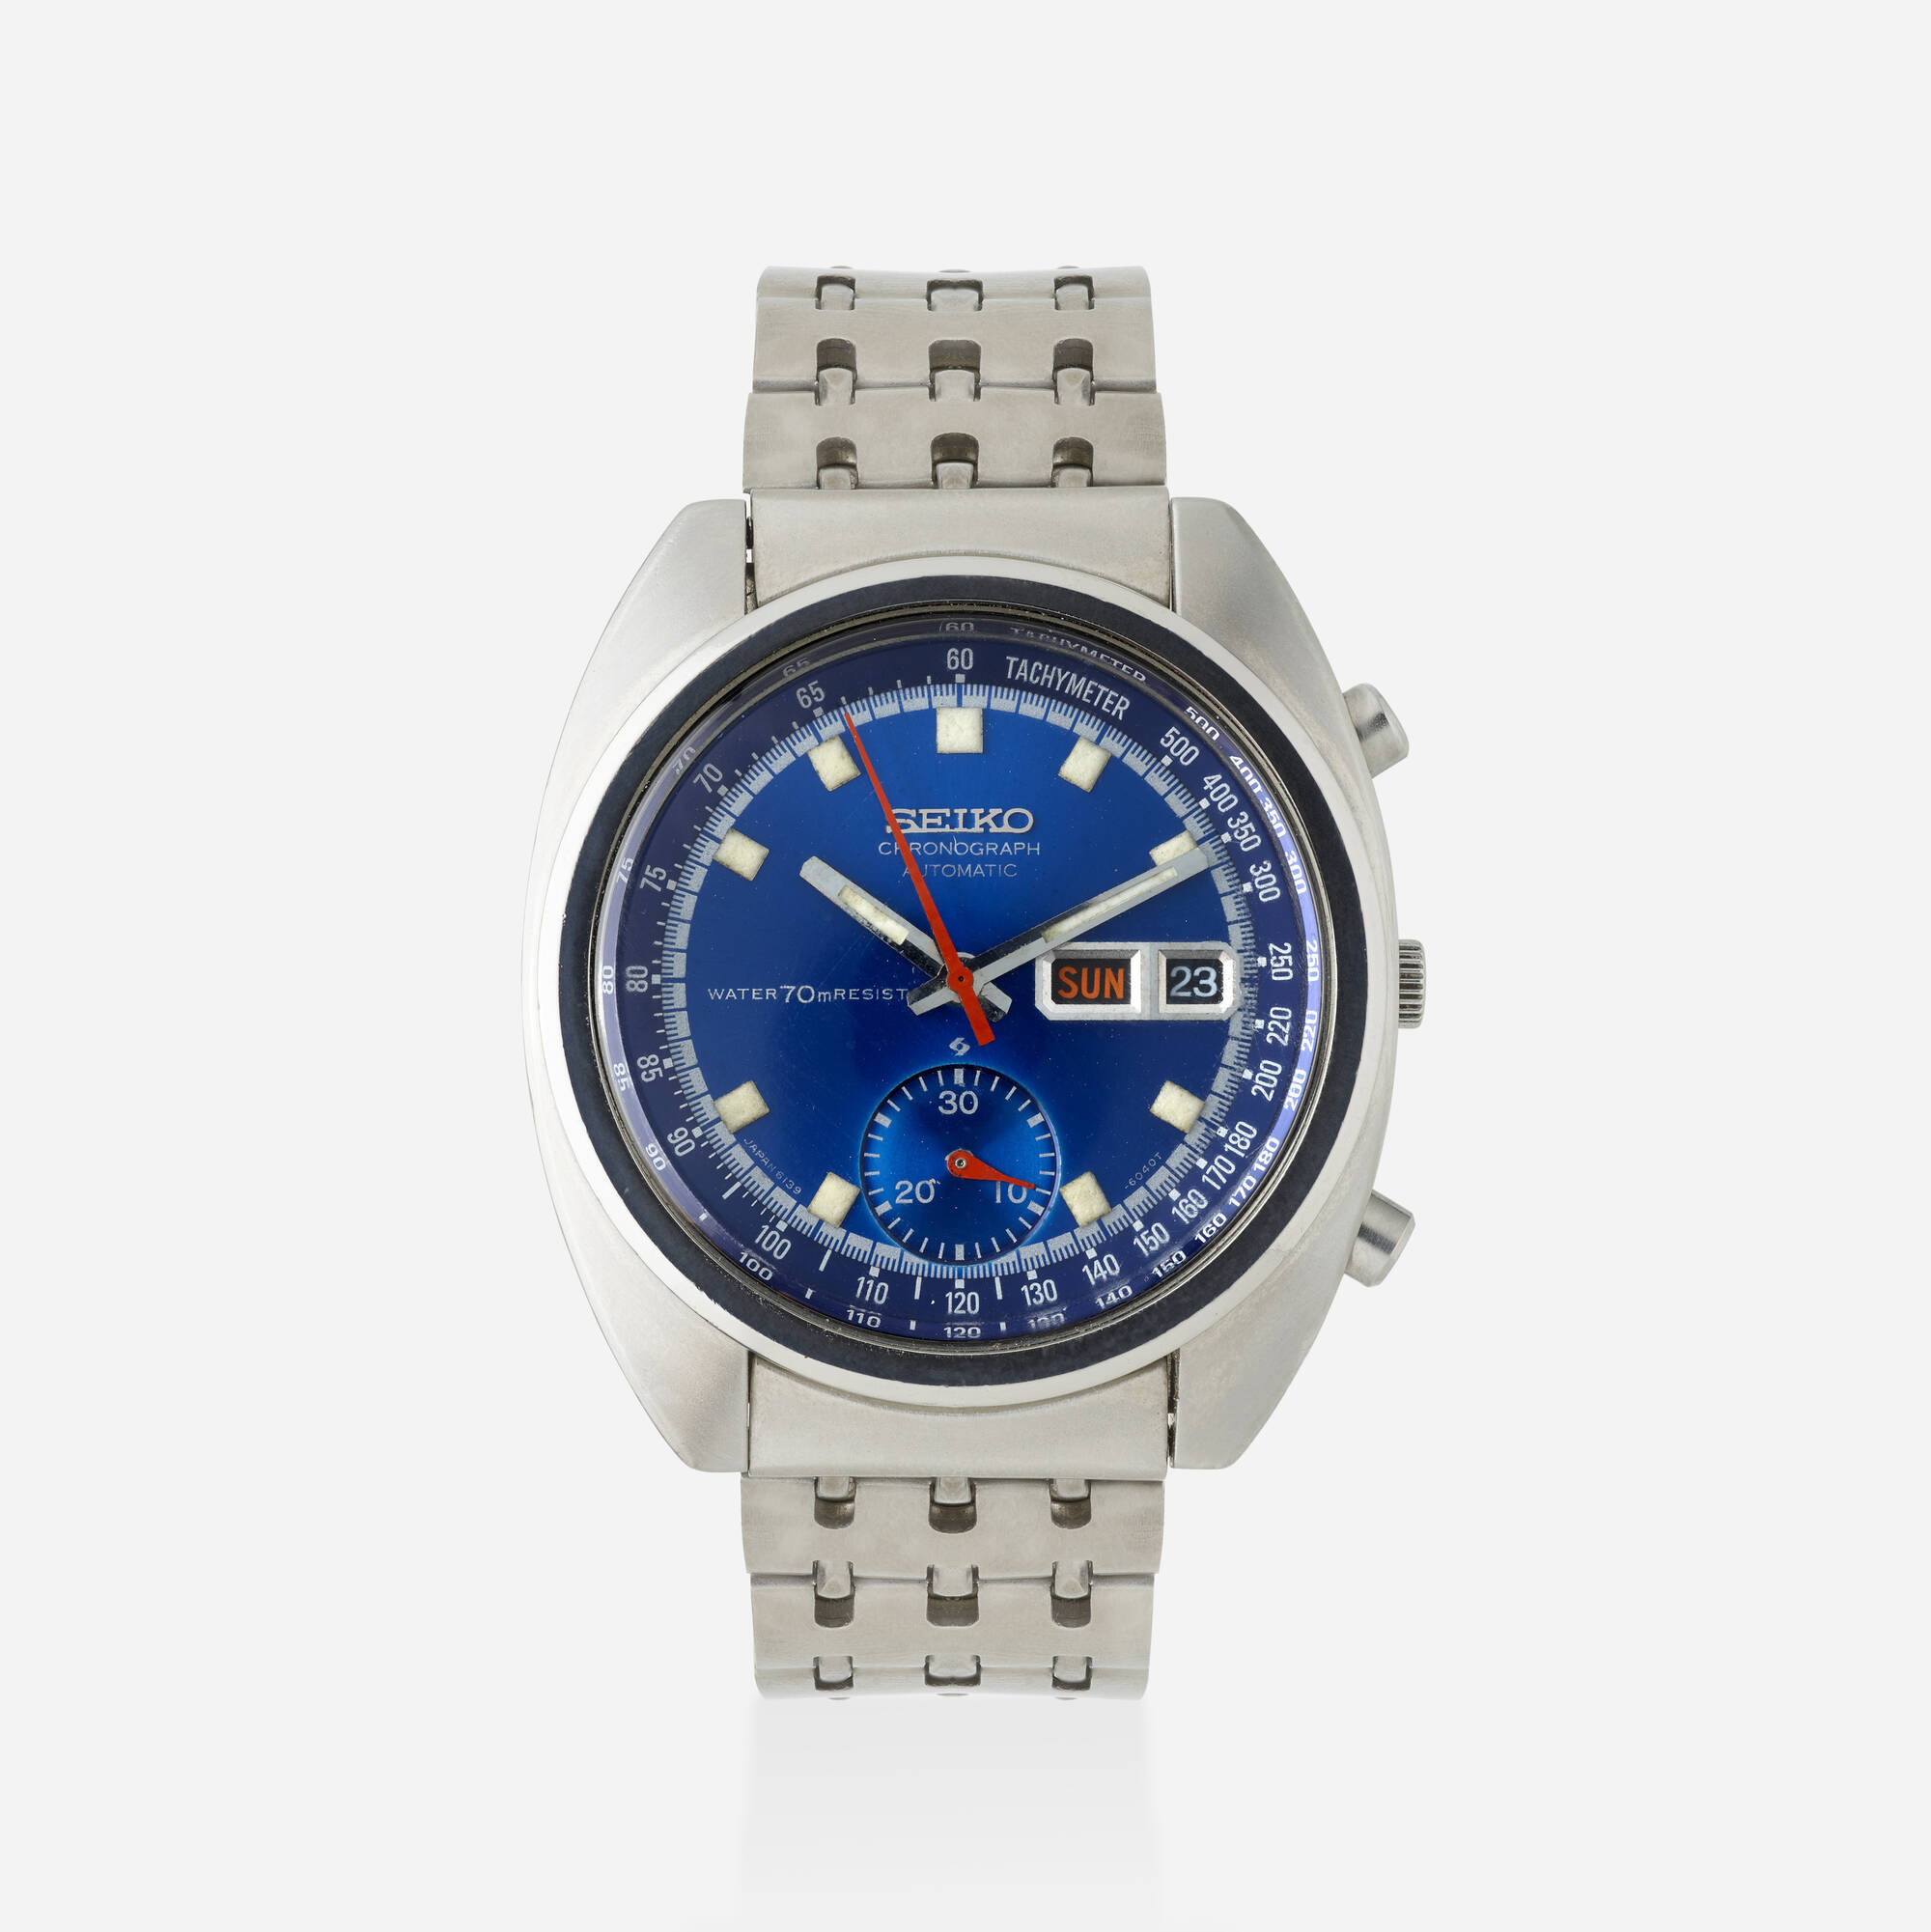 281: SEIKO, 'Speed Timer' chronograph wristwatch, Ref. 6139-6040T <  Important Design, 10 June 2021 < Auctions | Wright: Auctions of Art and  Design